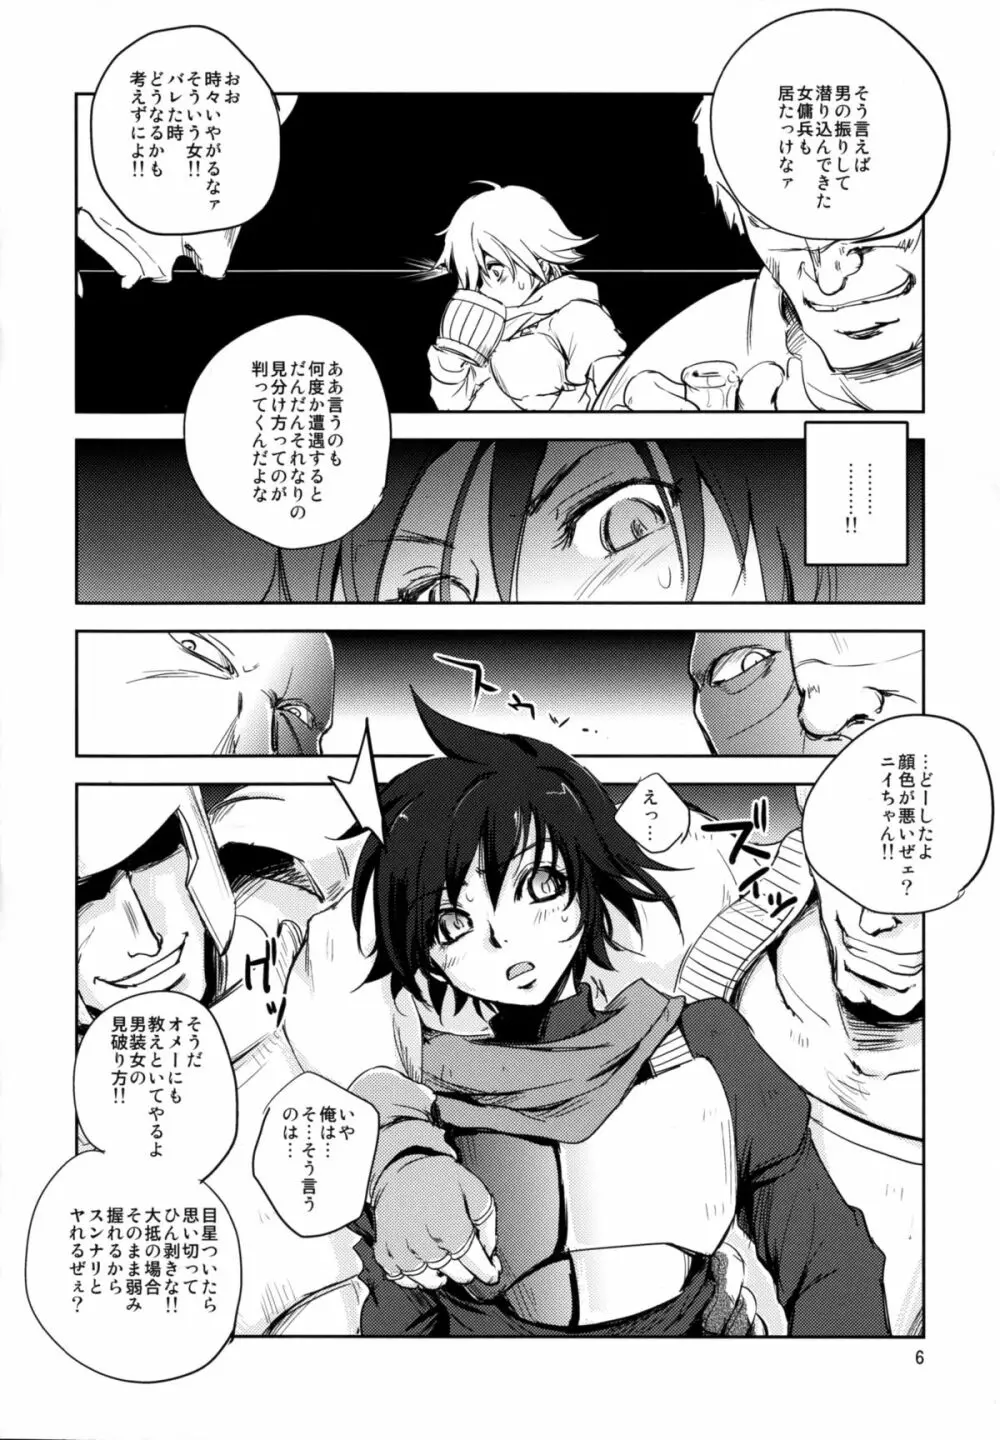 GRASSEN'S WAR ANOTHER STORY Ex #05 ノード侵攻 V Page.6